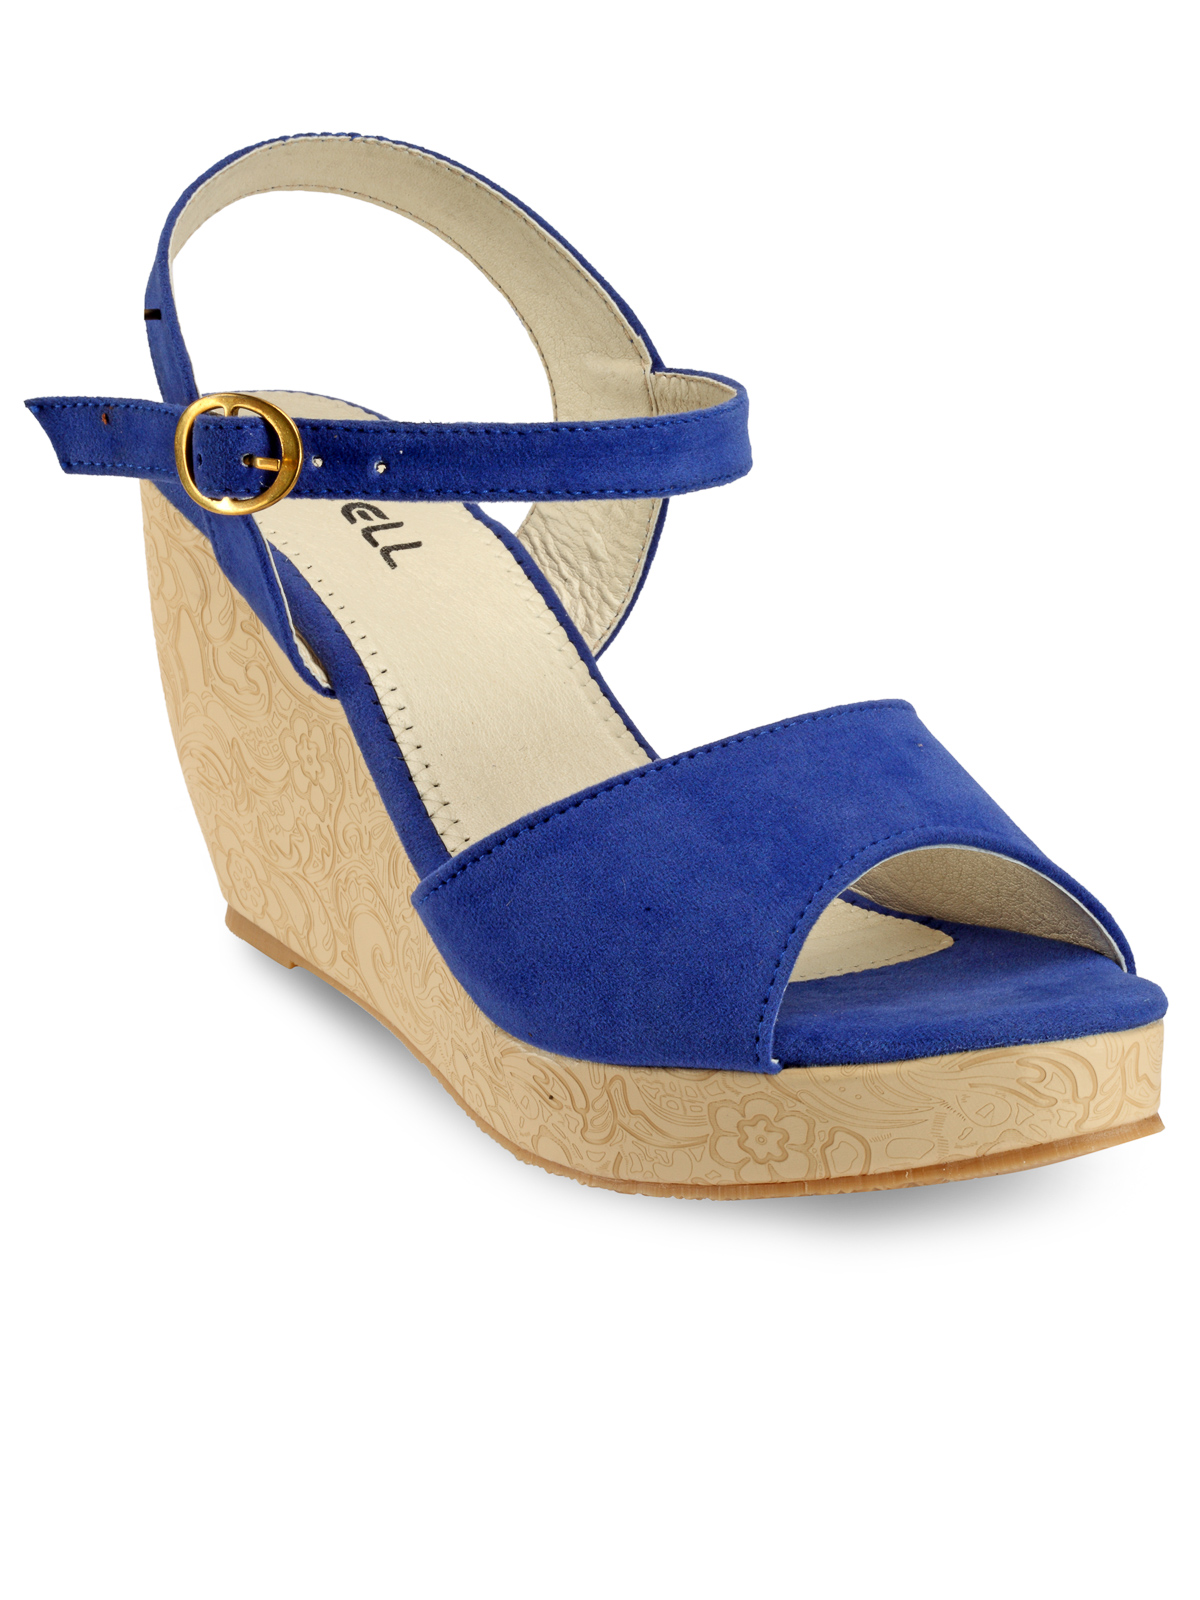 Buy Nell Women's Blue Wedges Online @ ₹799 from ShopClues